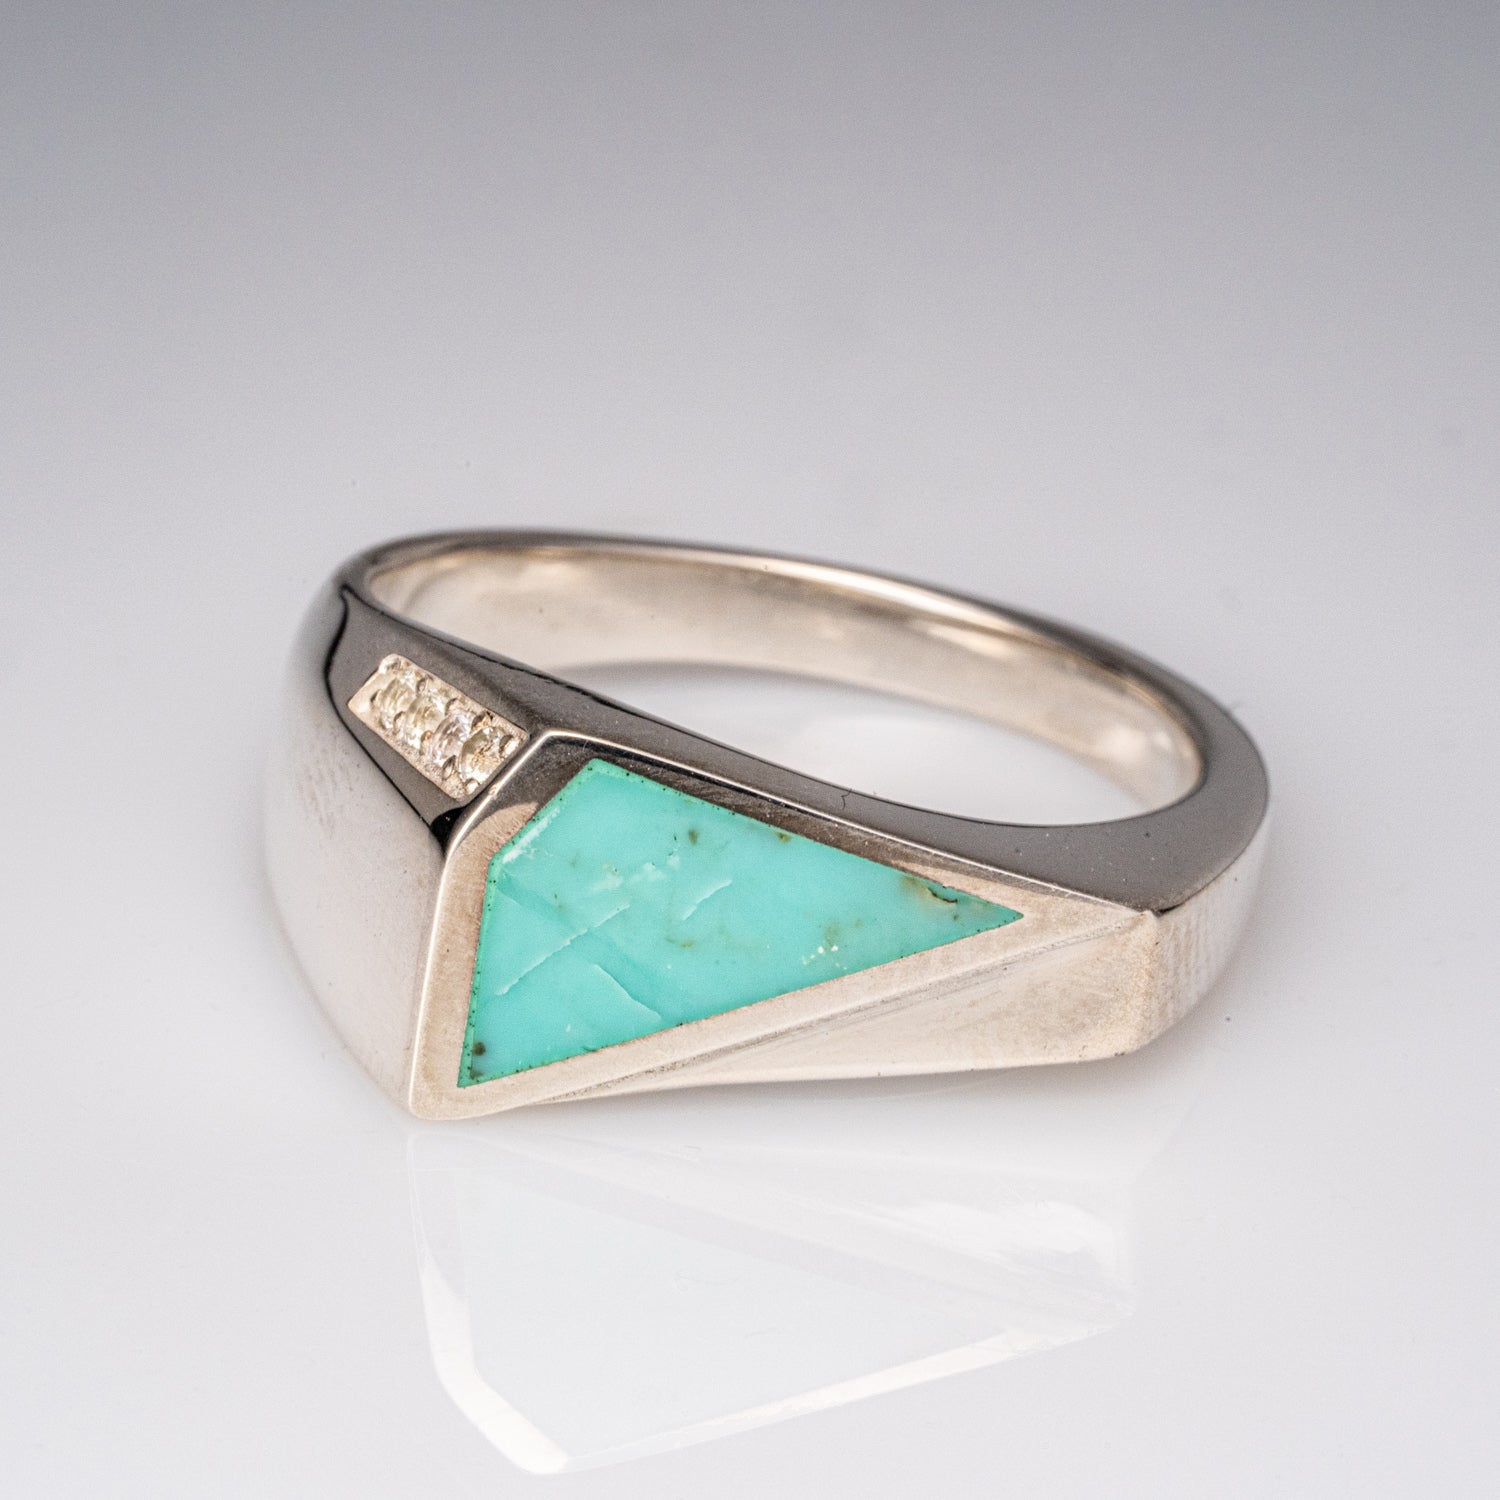 Genuine Turquoise Sterling Silver Men's Ring (Size 10.5)